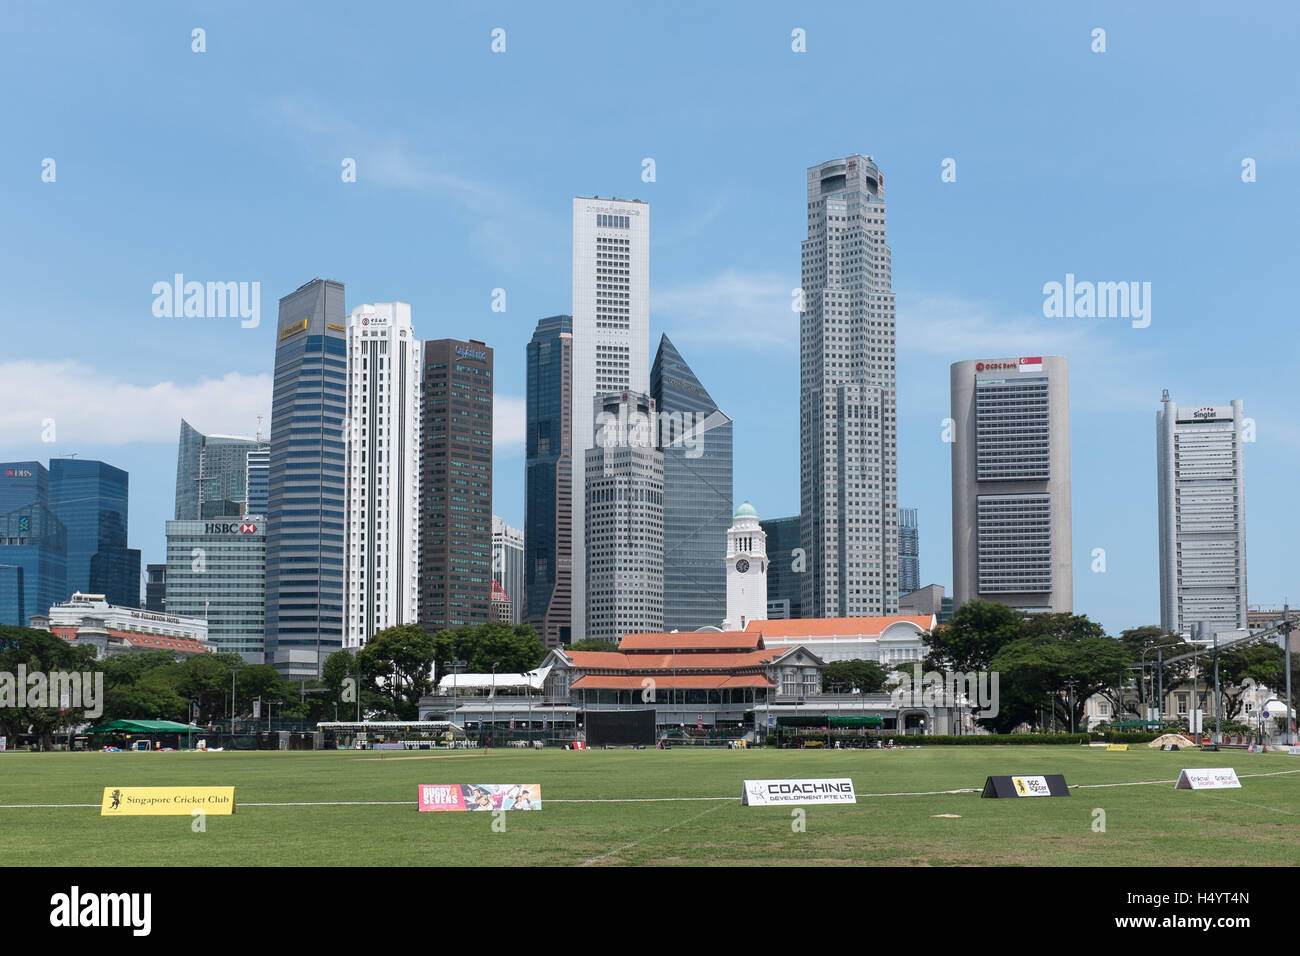 Singapore skyscrapers from central business district taken with historical cricket ground and club in foreground Stock Photo